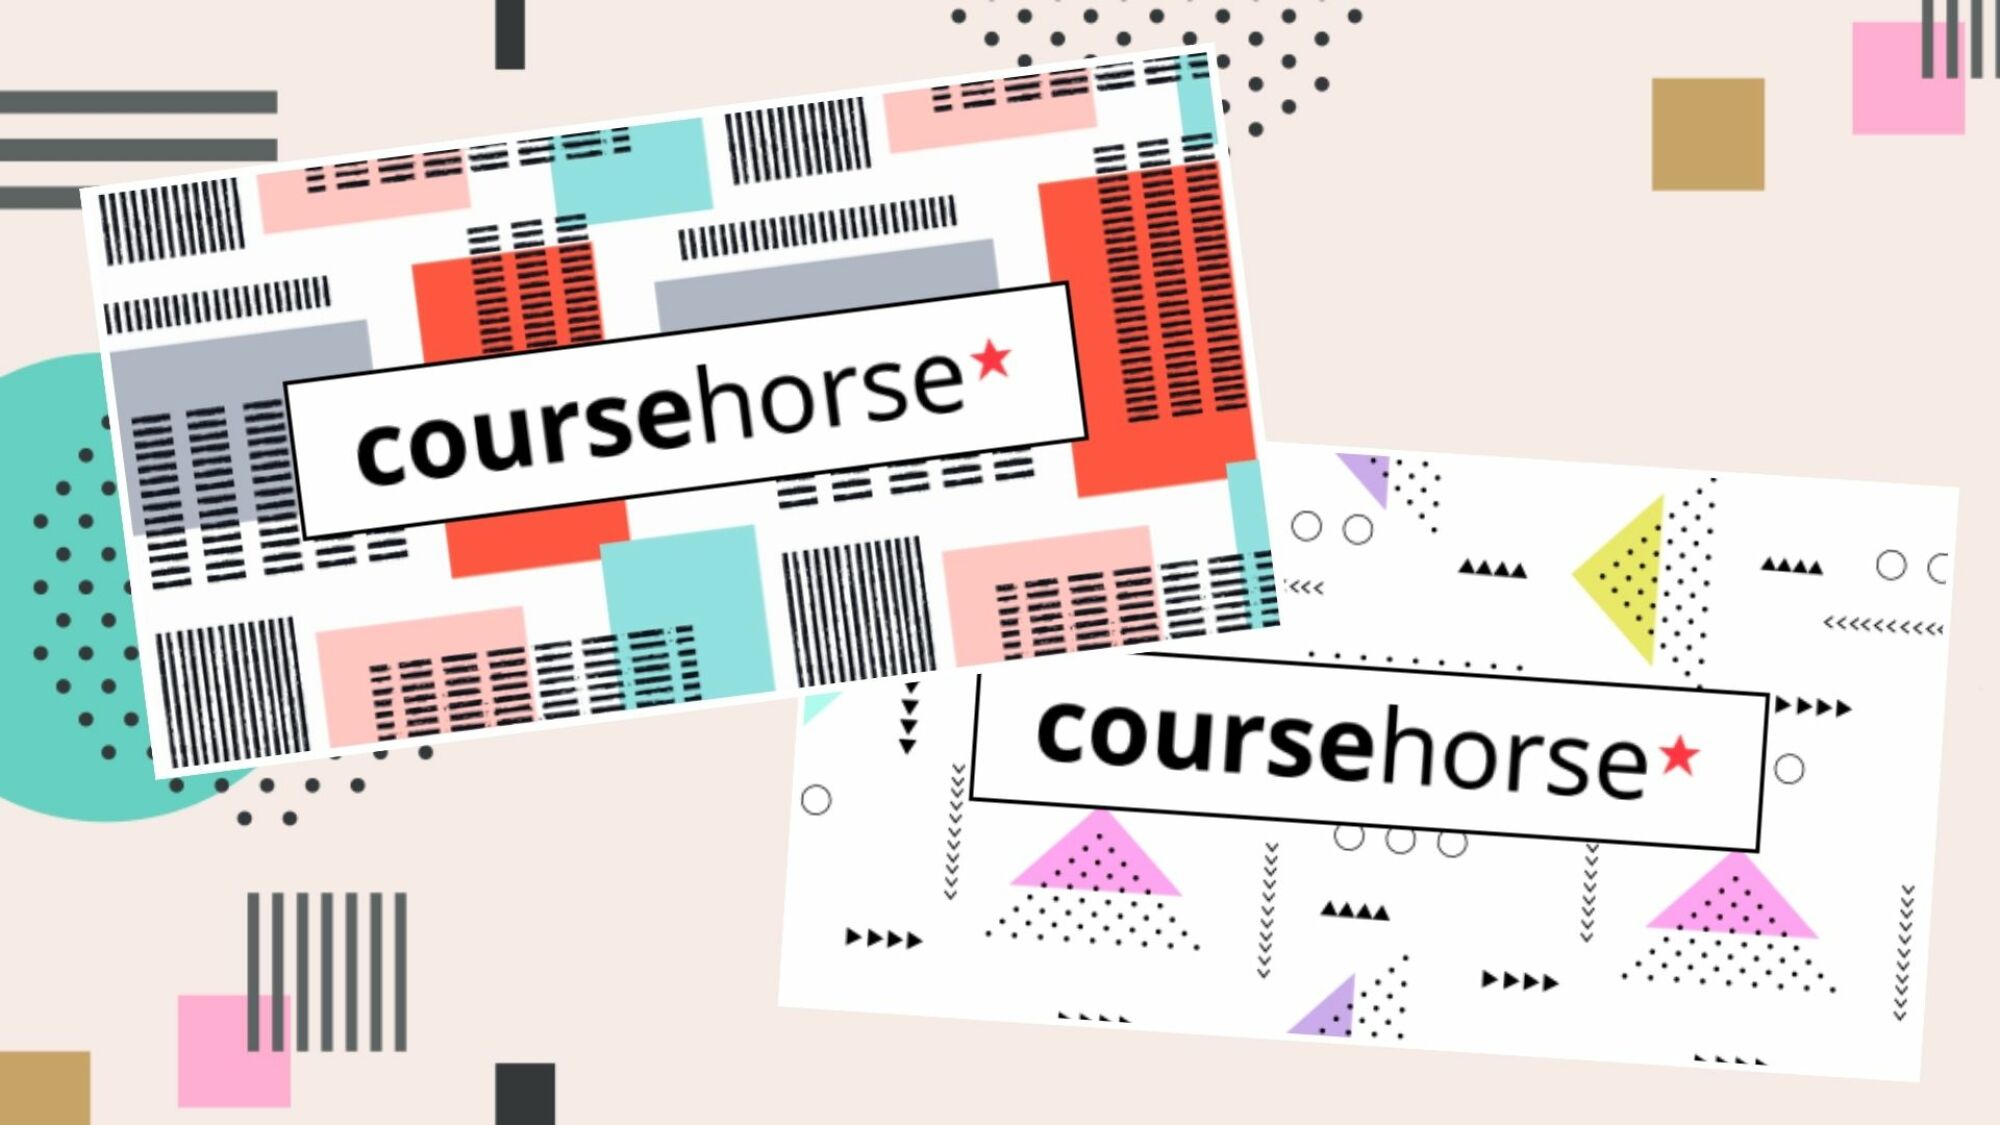 coursehorse gift cards on patterned background